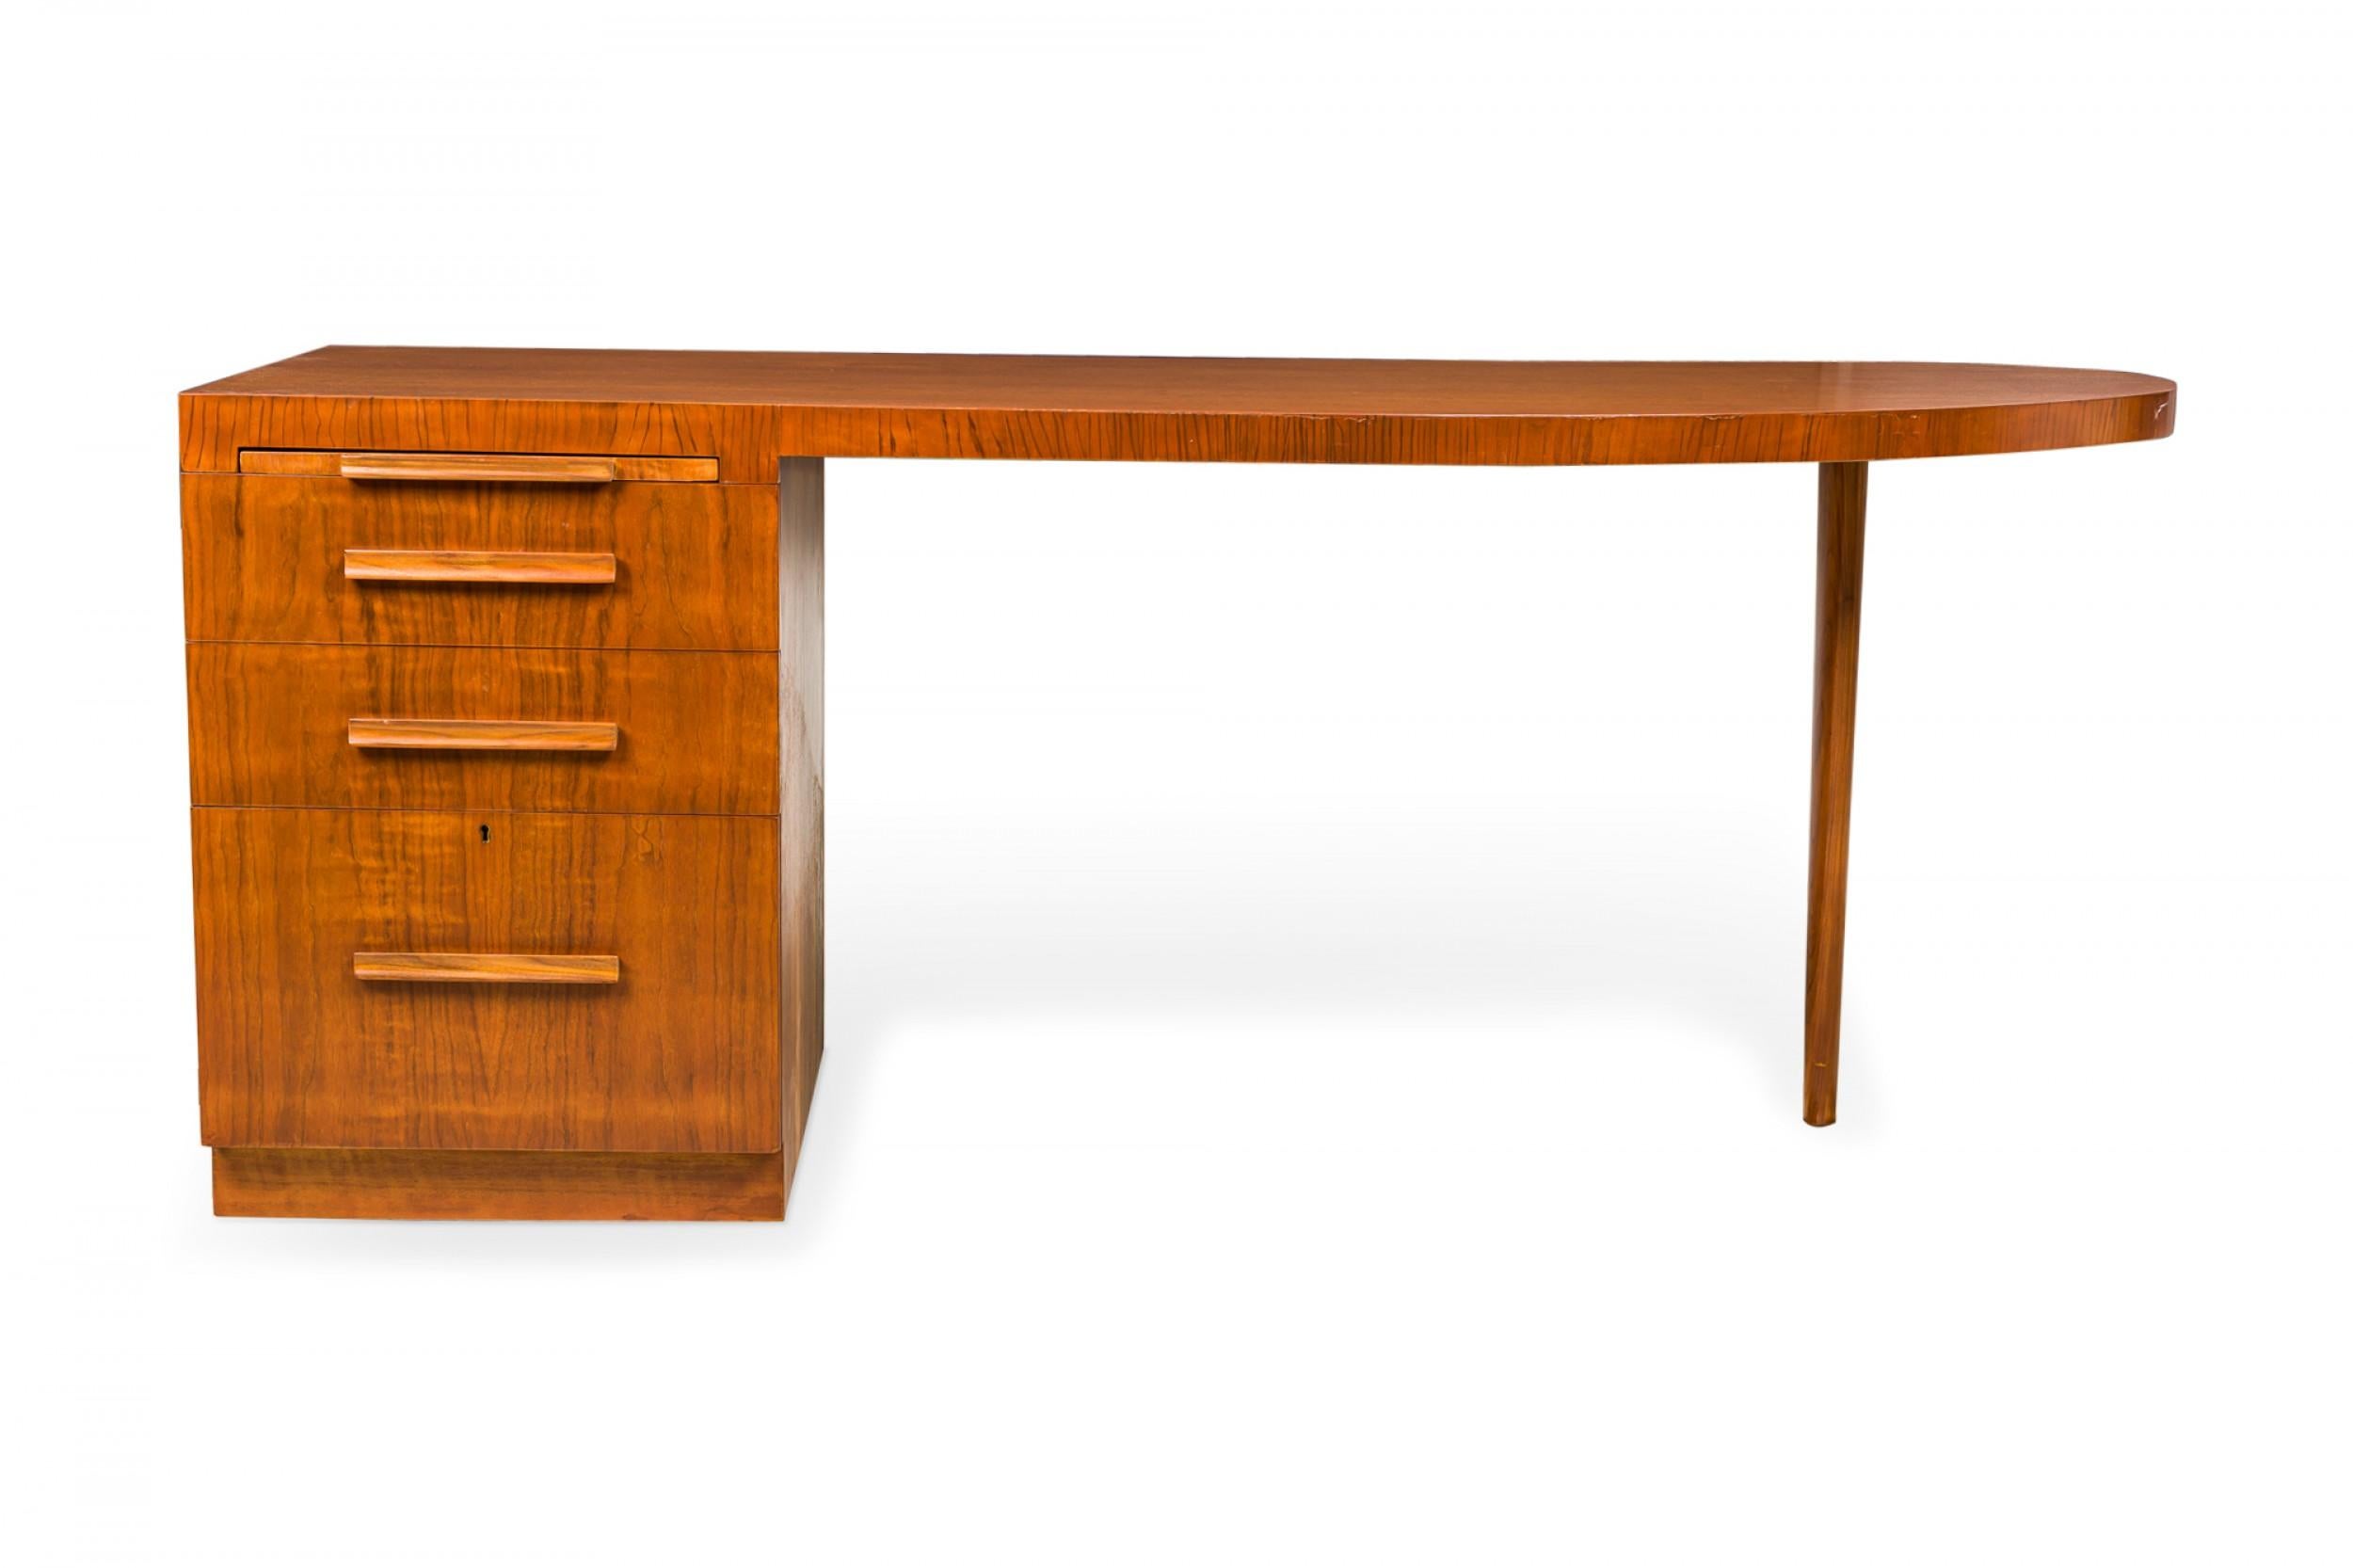 American mid-century walnut desk with a top squared on the left over a set of four drawers in graduated heights with wooden bar drawer pulls, and rounded on the right, supported by a tapered dowel leg. (T.H. ROBSJOHN-GIBBINGS FOR WIDDICOMB FURNITURE